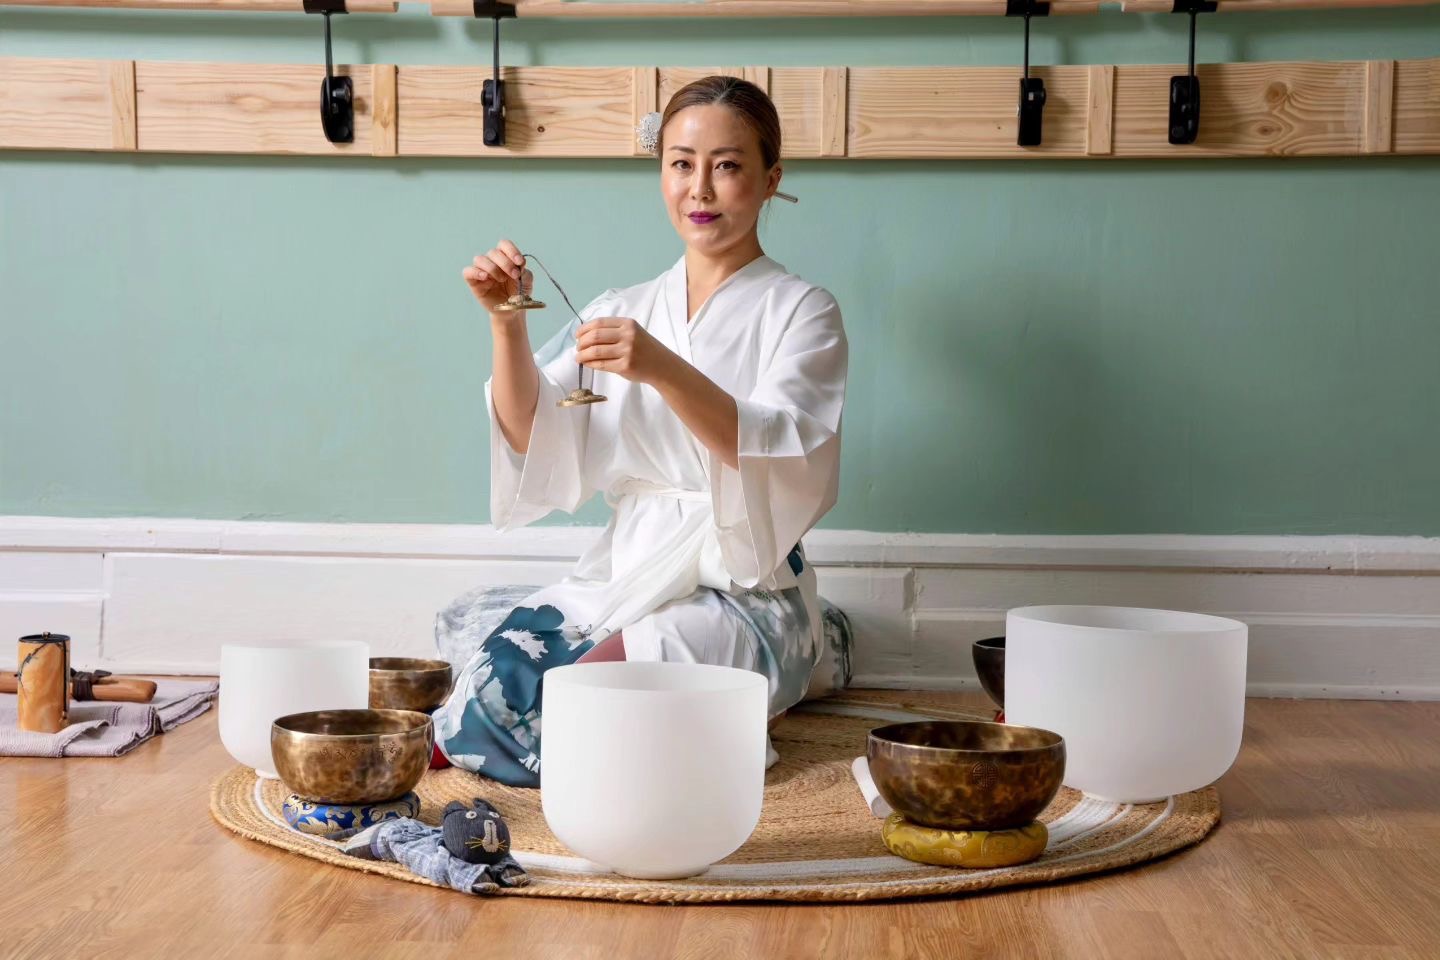 Revolutionary Healing Experience: The Quantum Healing Room Welcomes Renowned Sound Healer Eunmi for Special Sound Bath Sessions